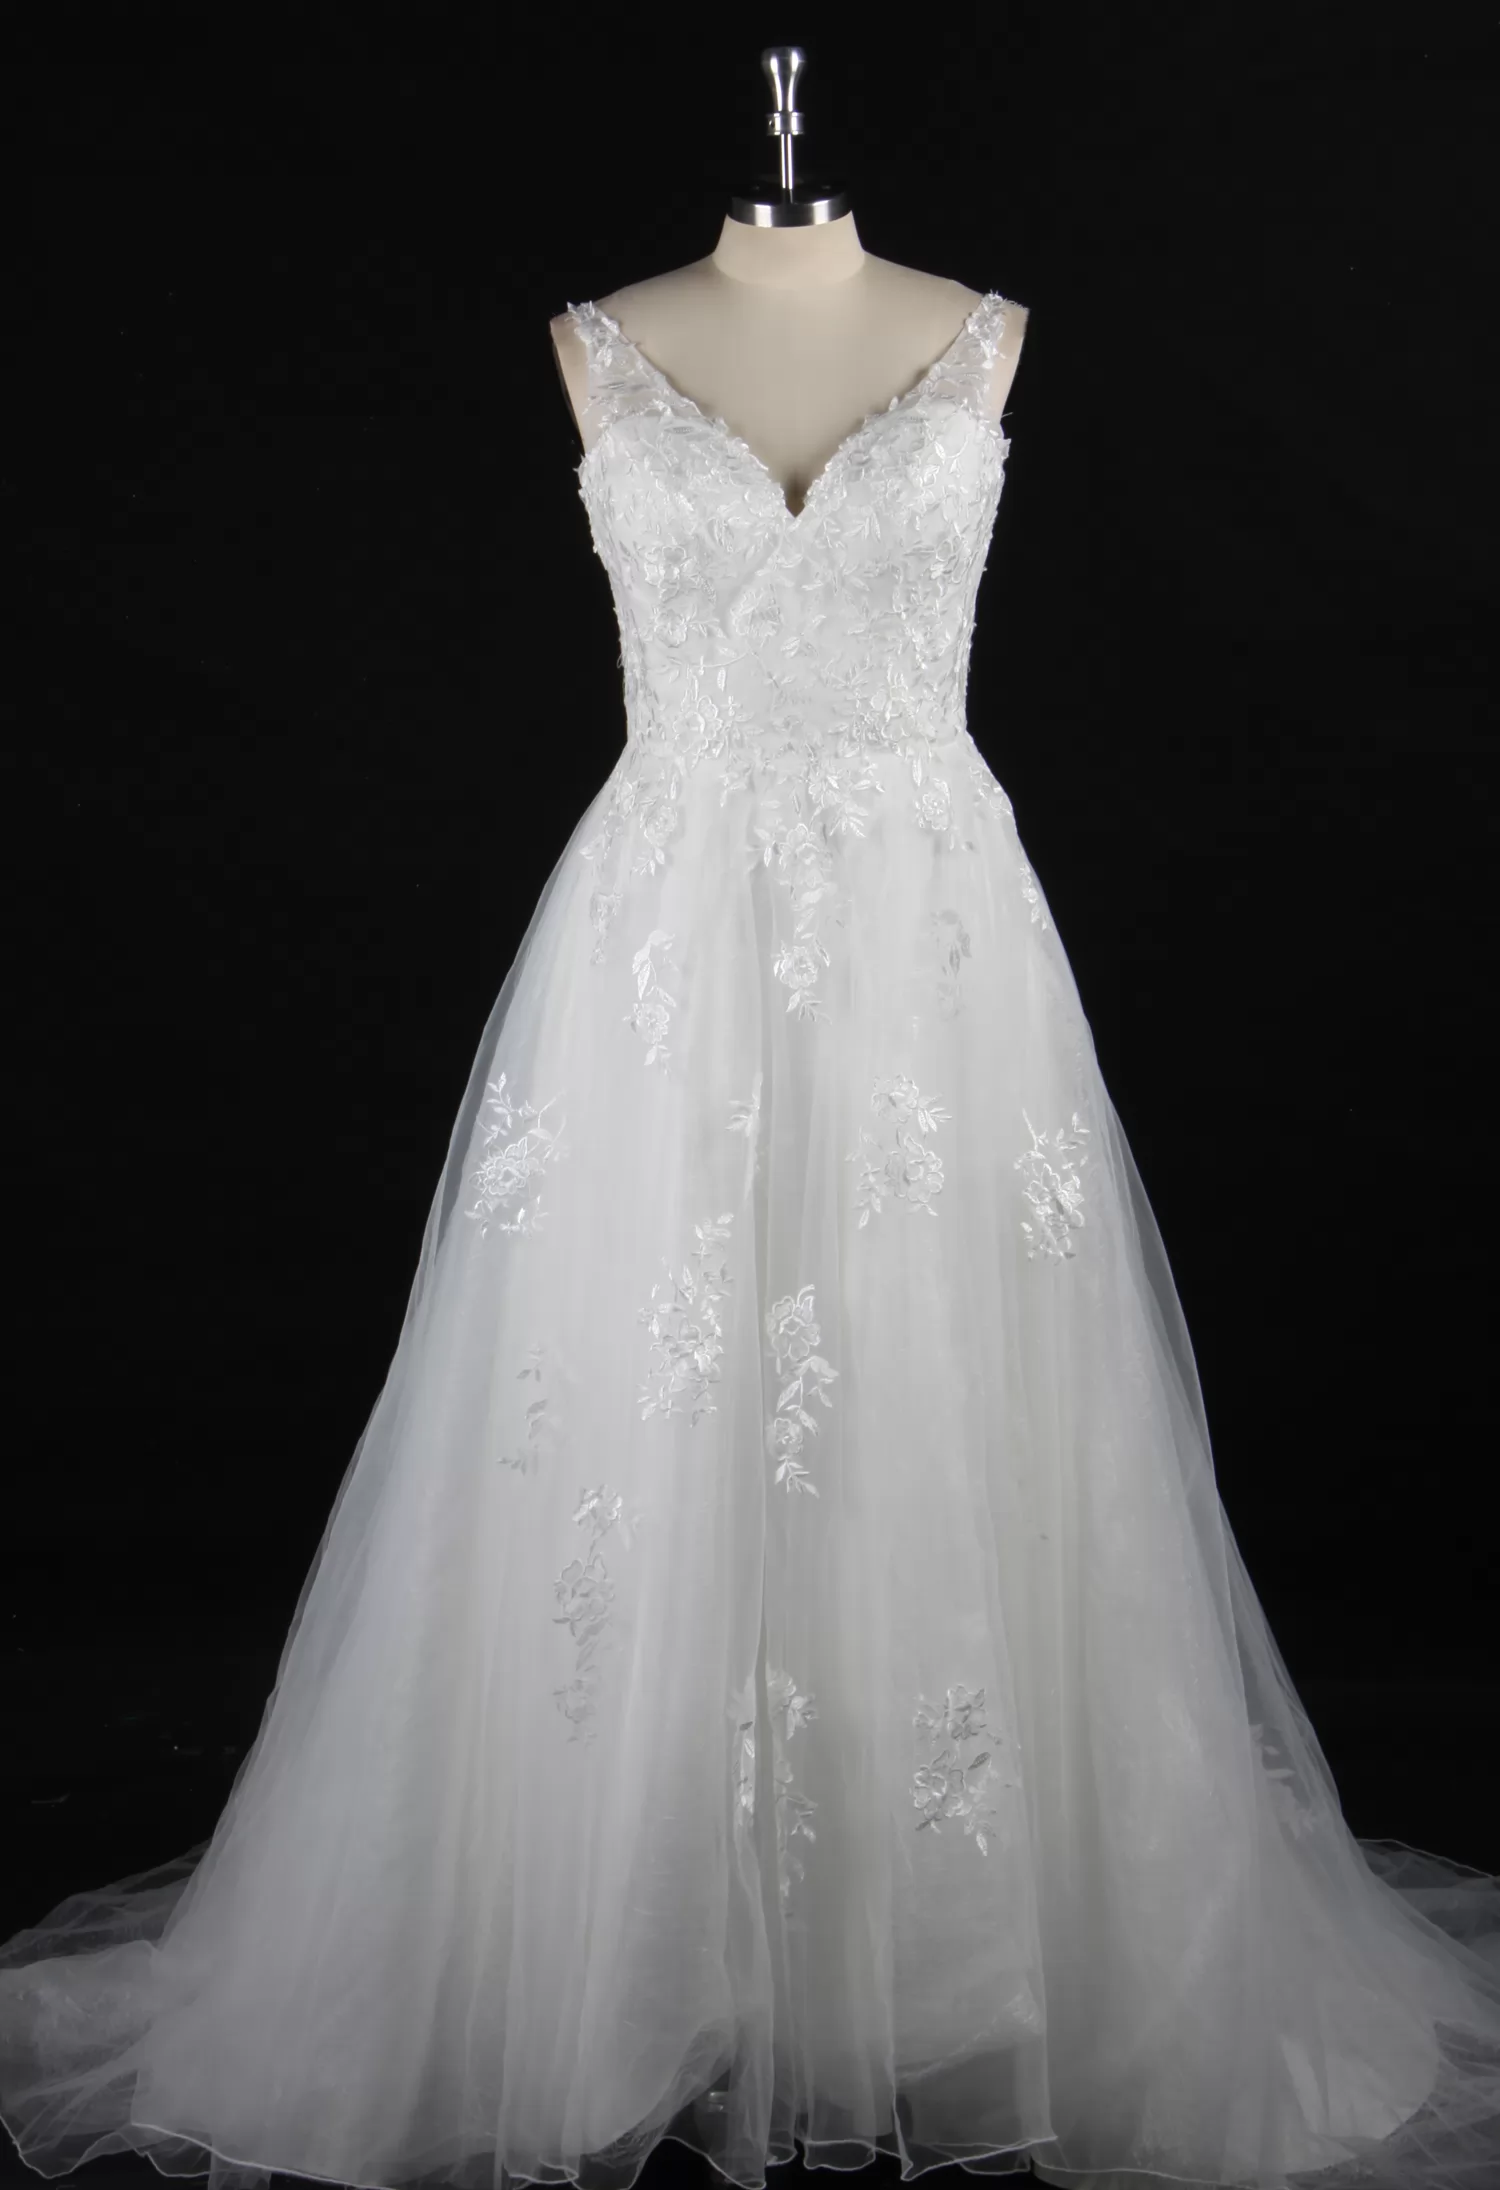 Embroidered Tulle Wedding Dress With A-Line Silhouette and V-Neck